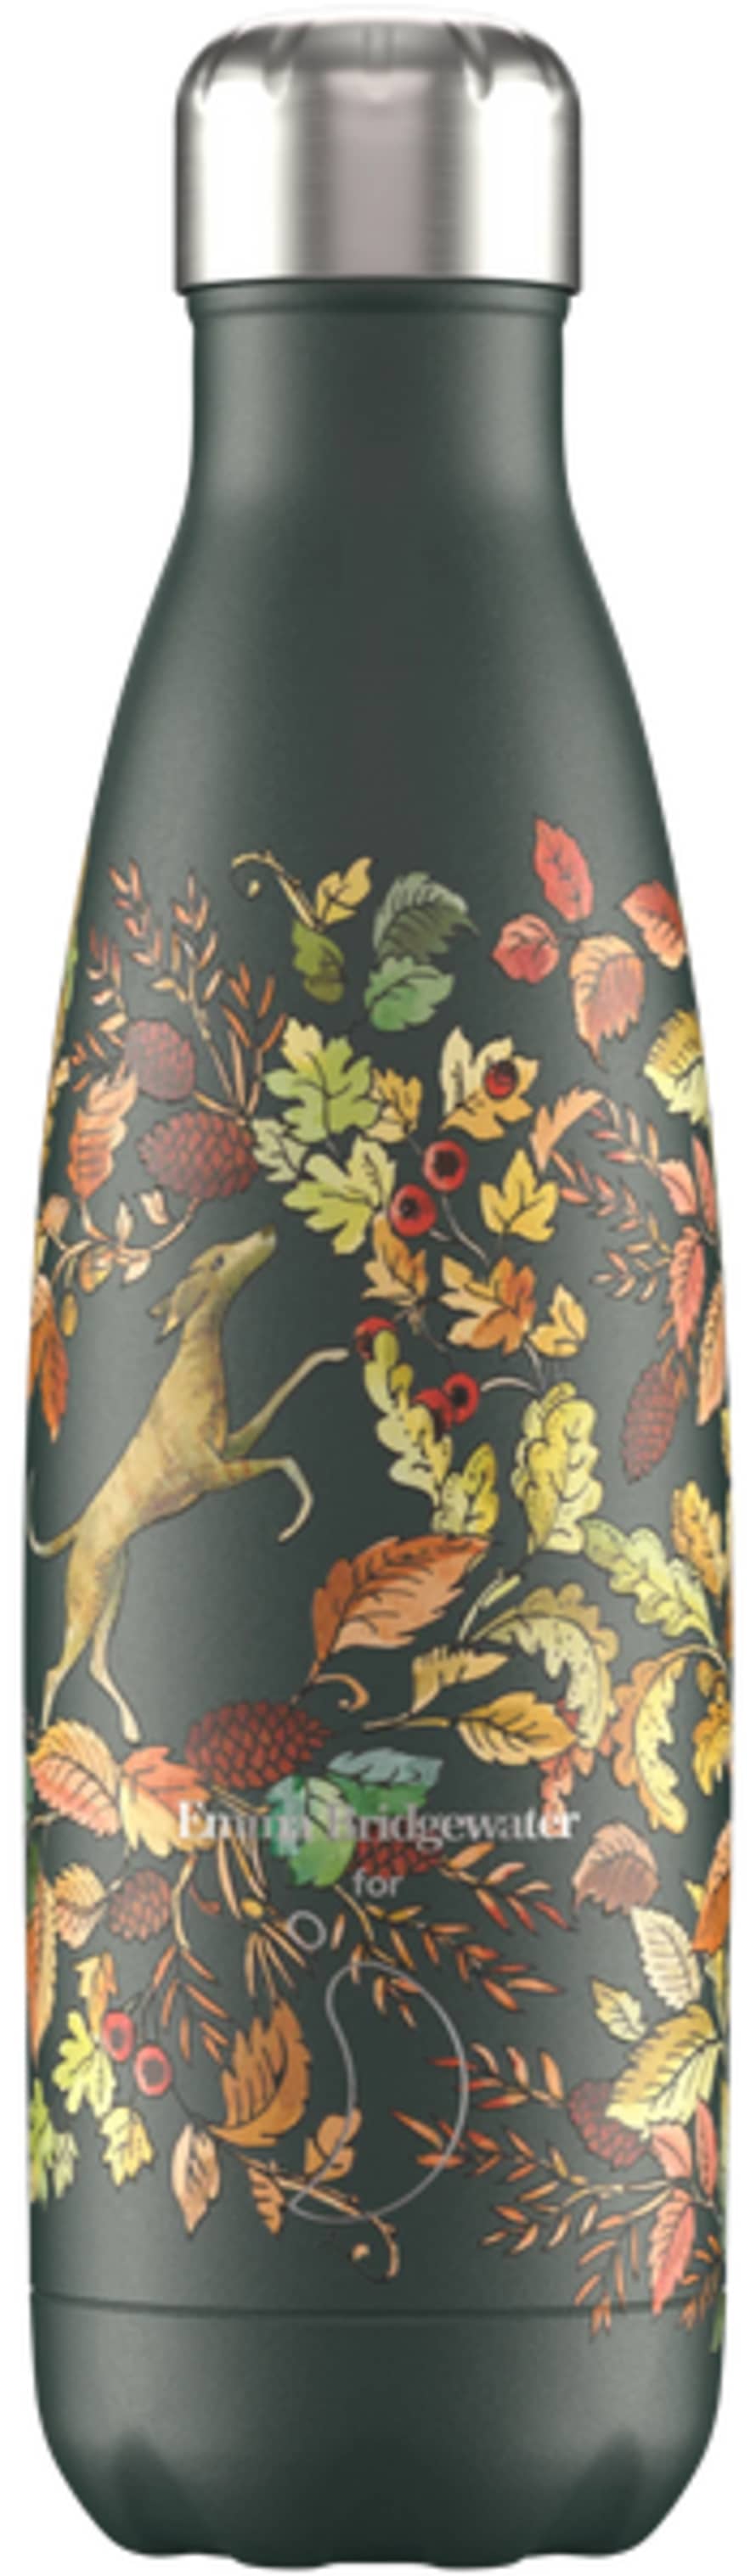 Chilly’s Bottles Chilly Emma Bridgewater 500ml Bottle - Dog In The Woods